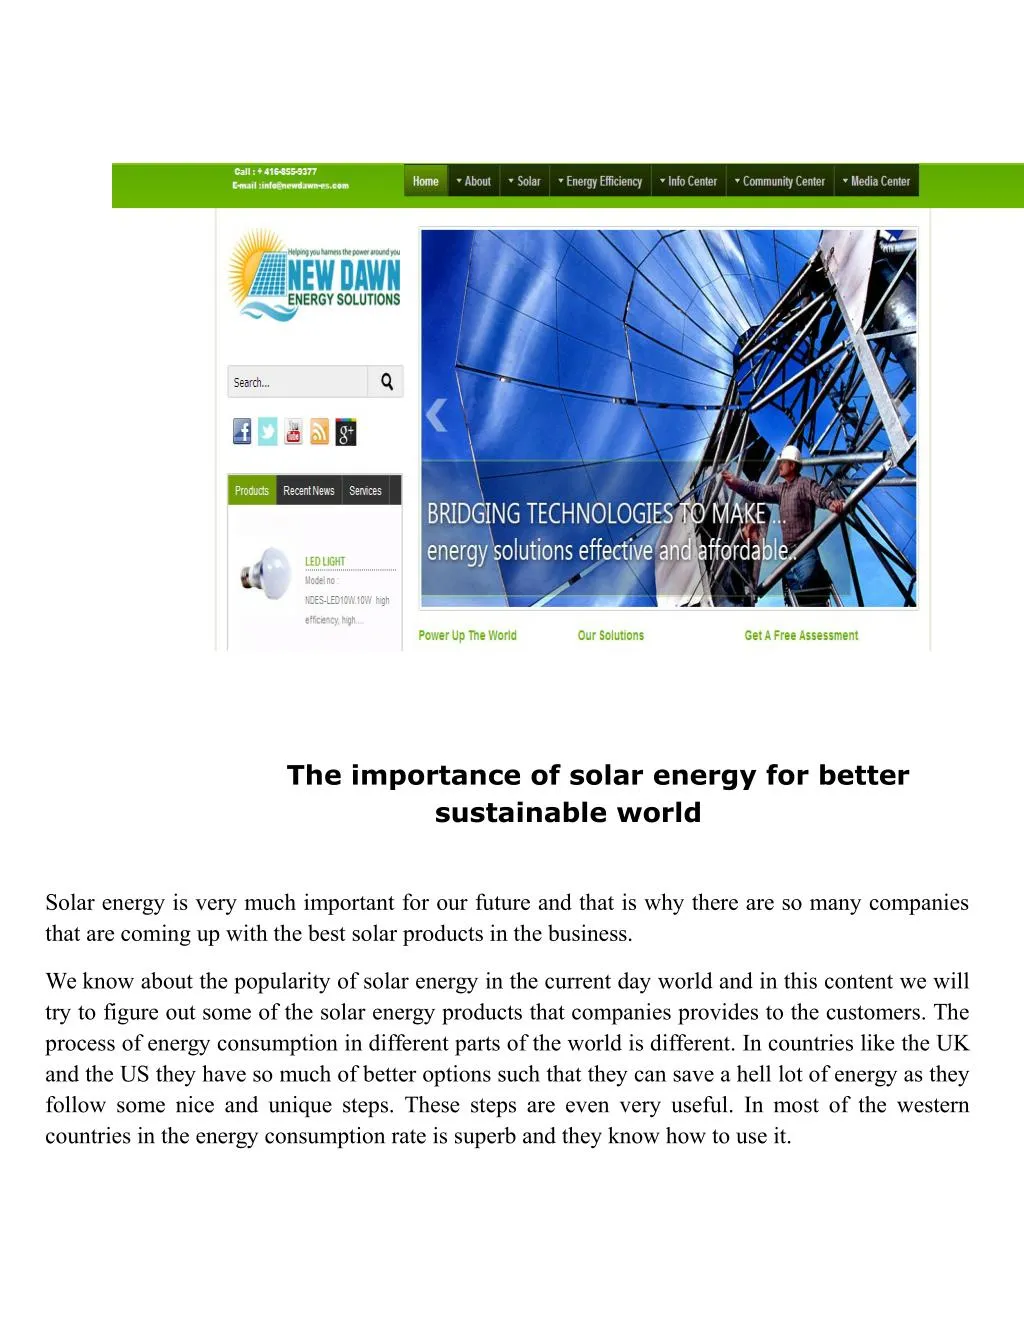 the importance of solar energy for better